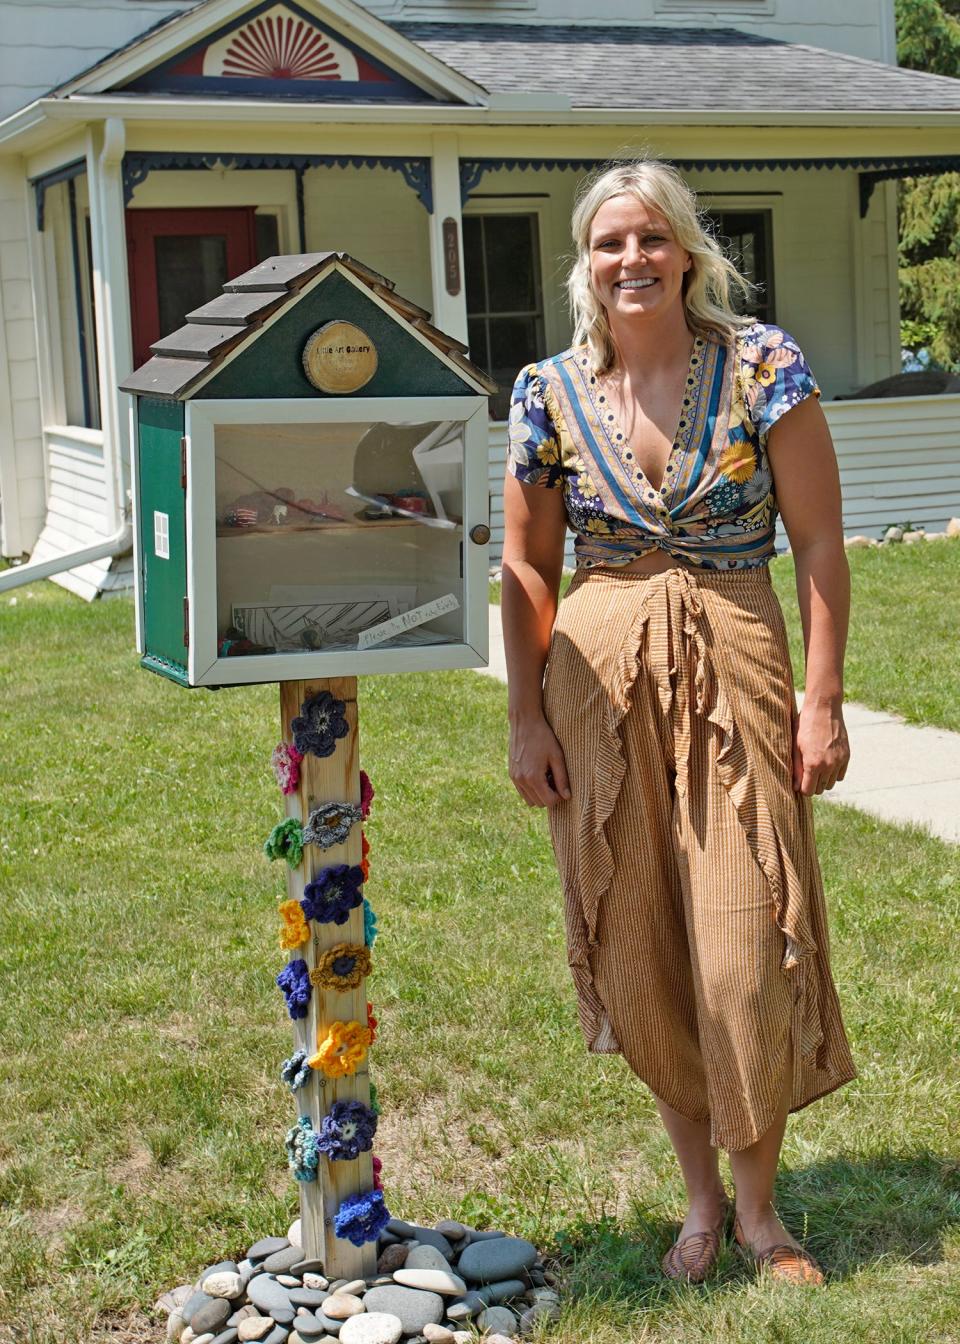 The Tecumseh Free Little Art Gallery (FLAG) was started in October 2021 by  Amara Karapas, a seventh and eighth grade visual art teacher at Dexter’s Mill Creek Middle School, in front of her home at 205 N. Ottawa St., next door to the Tecumseh District Library and close to downtown.